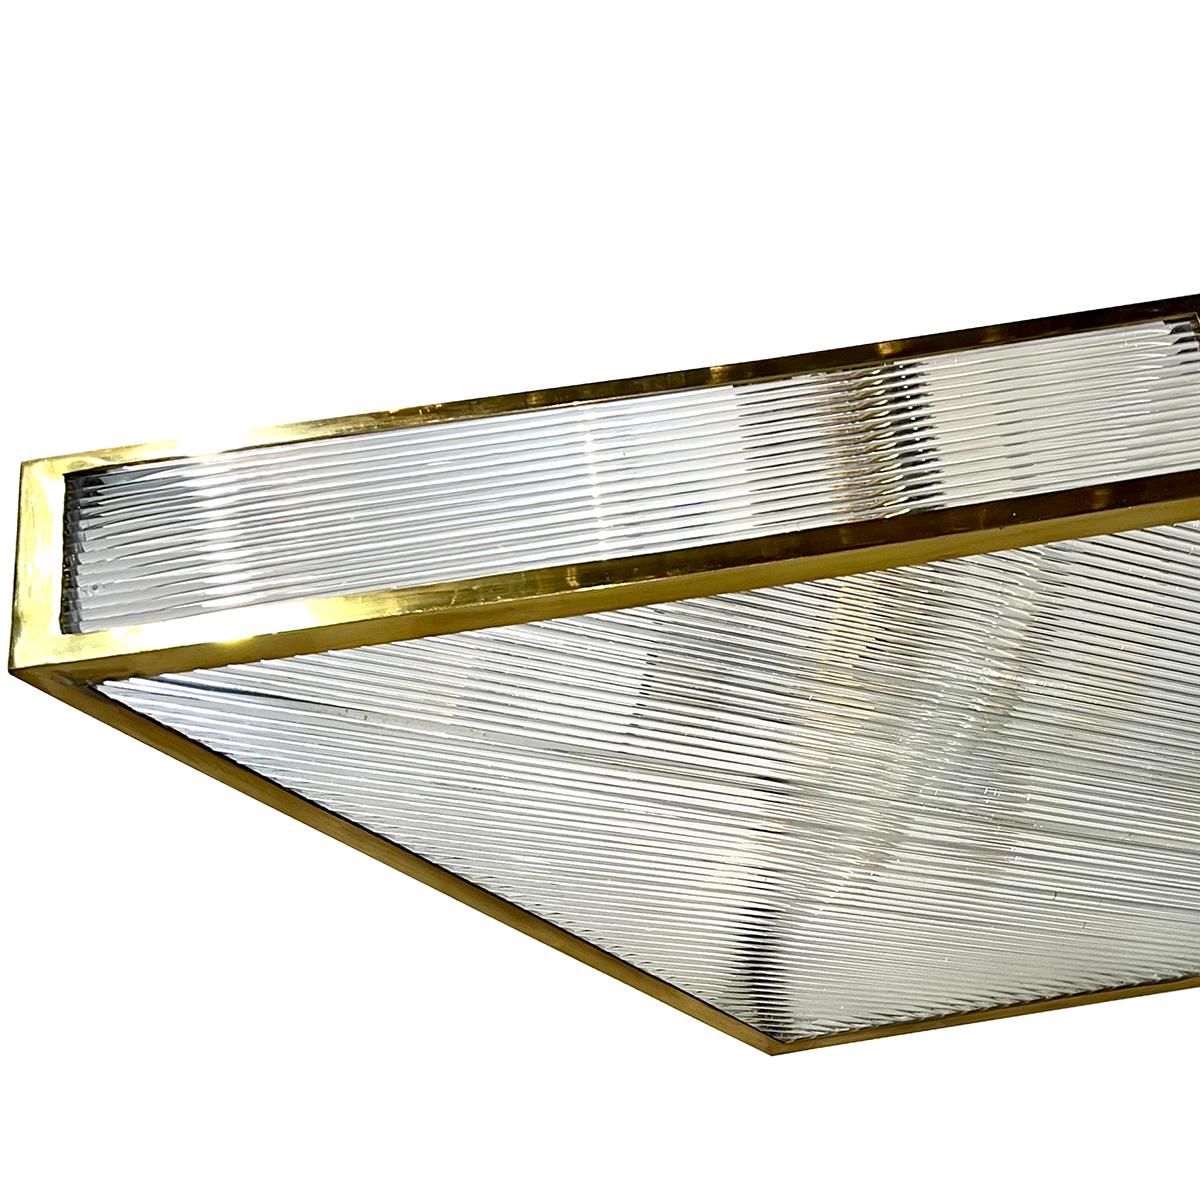 A mid century Italian diamond shaped fixture with glass rods and interior lights.

Measurements:
Length: 47″
Width: 25″
Drop: 24″